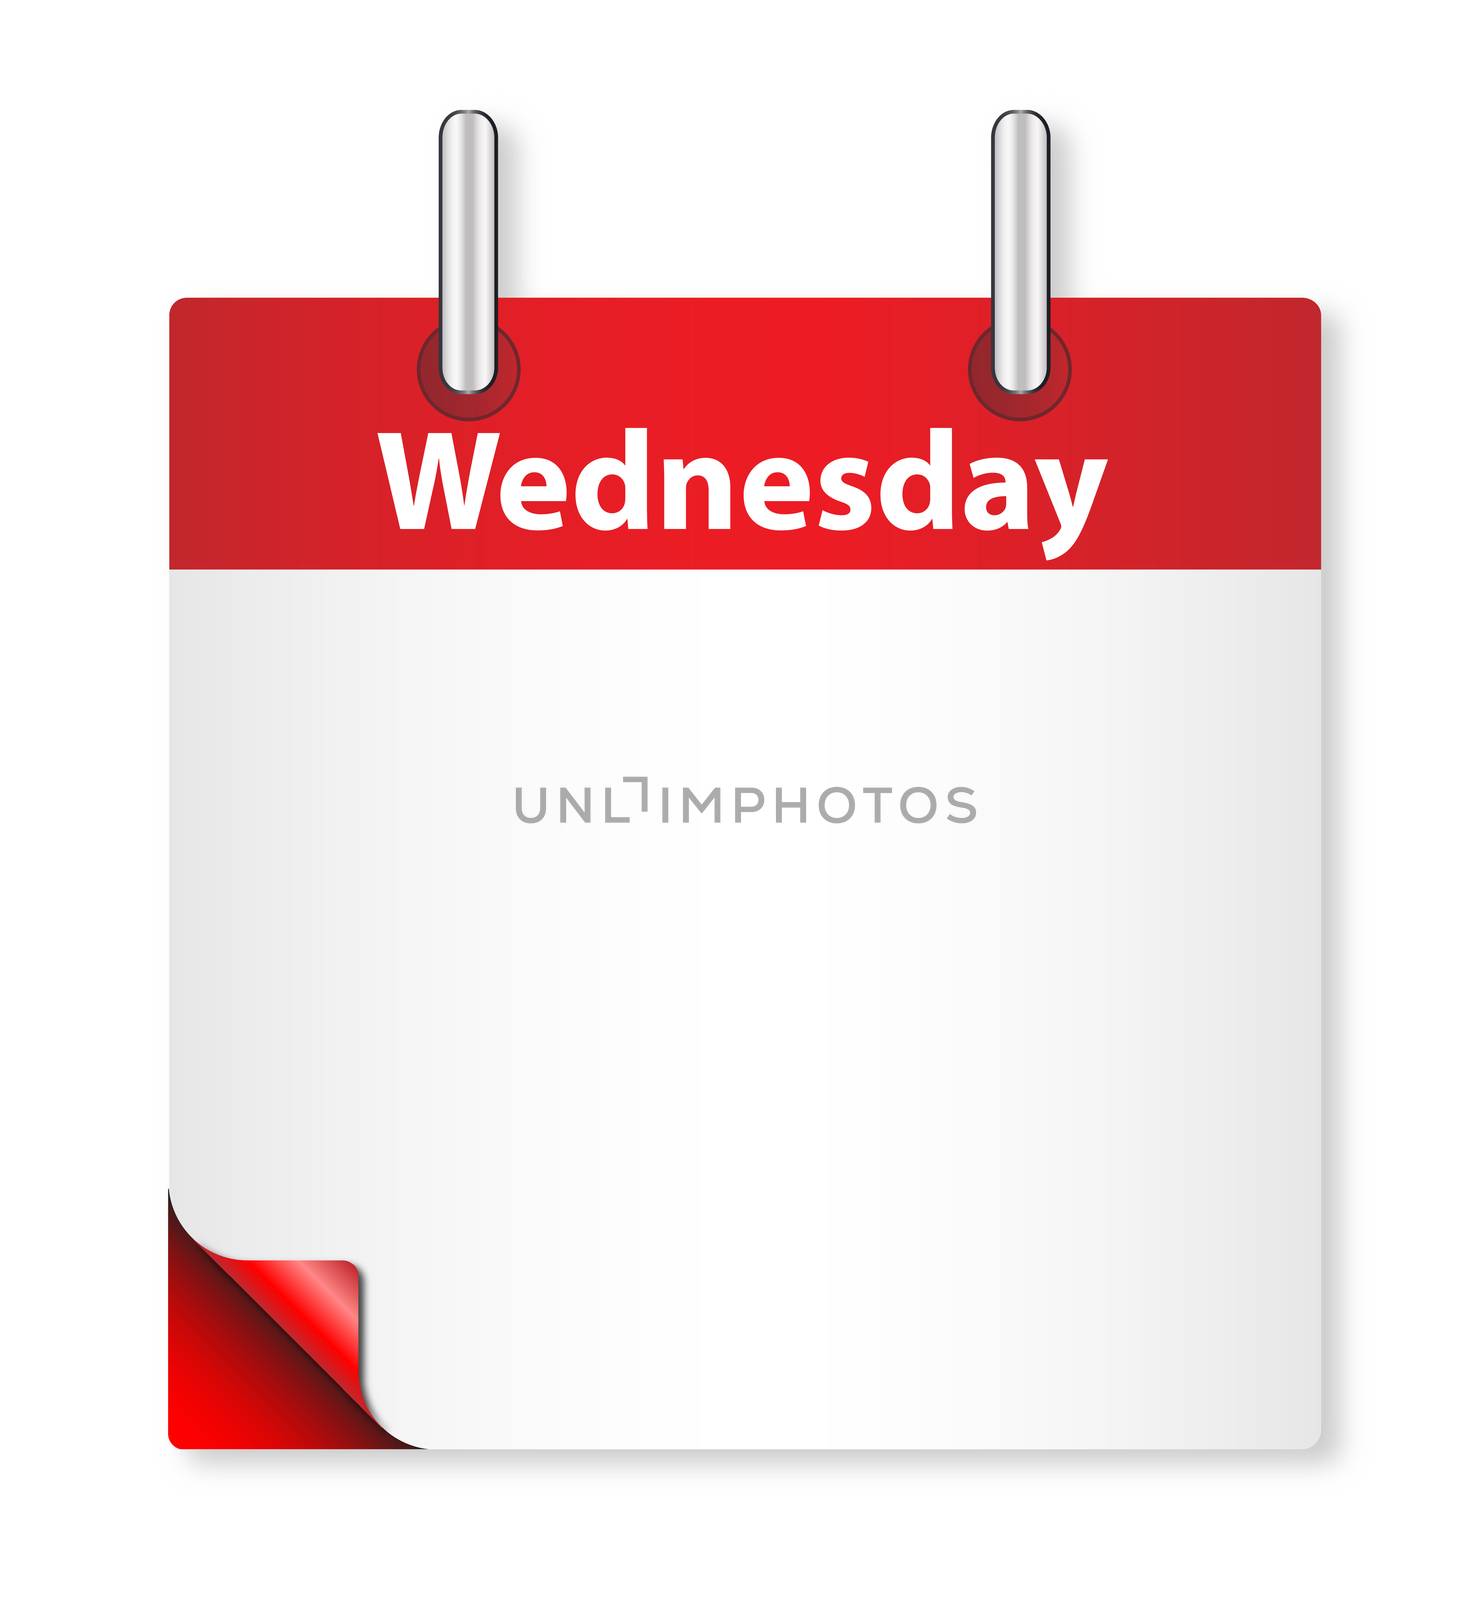 A calender date offering a blank Wednesday page over white